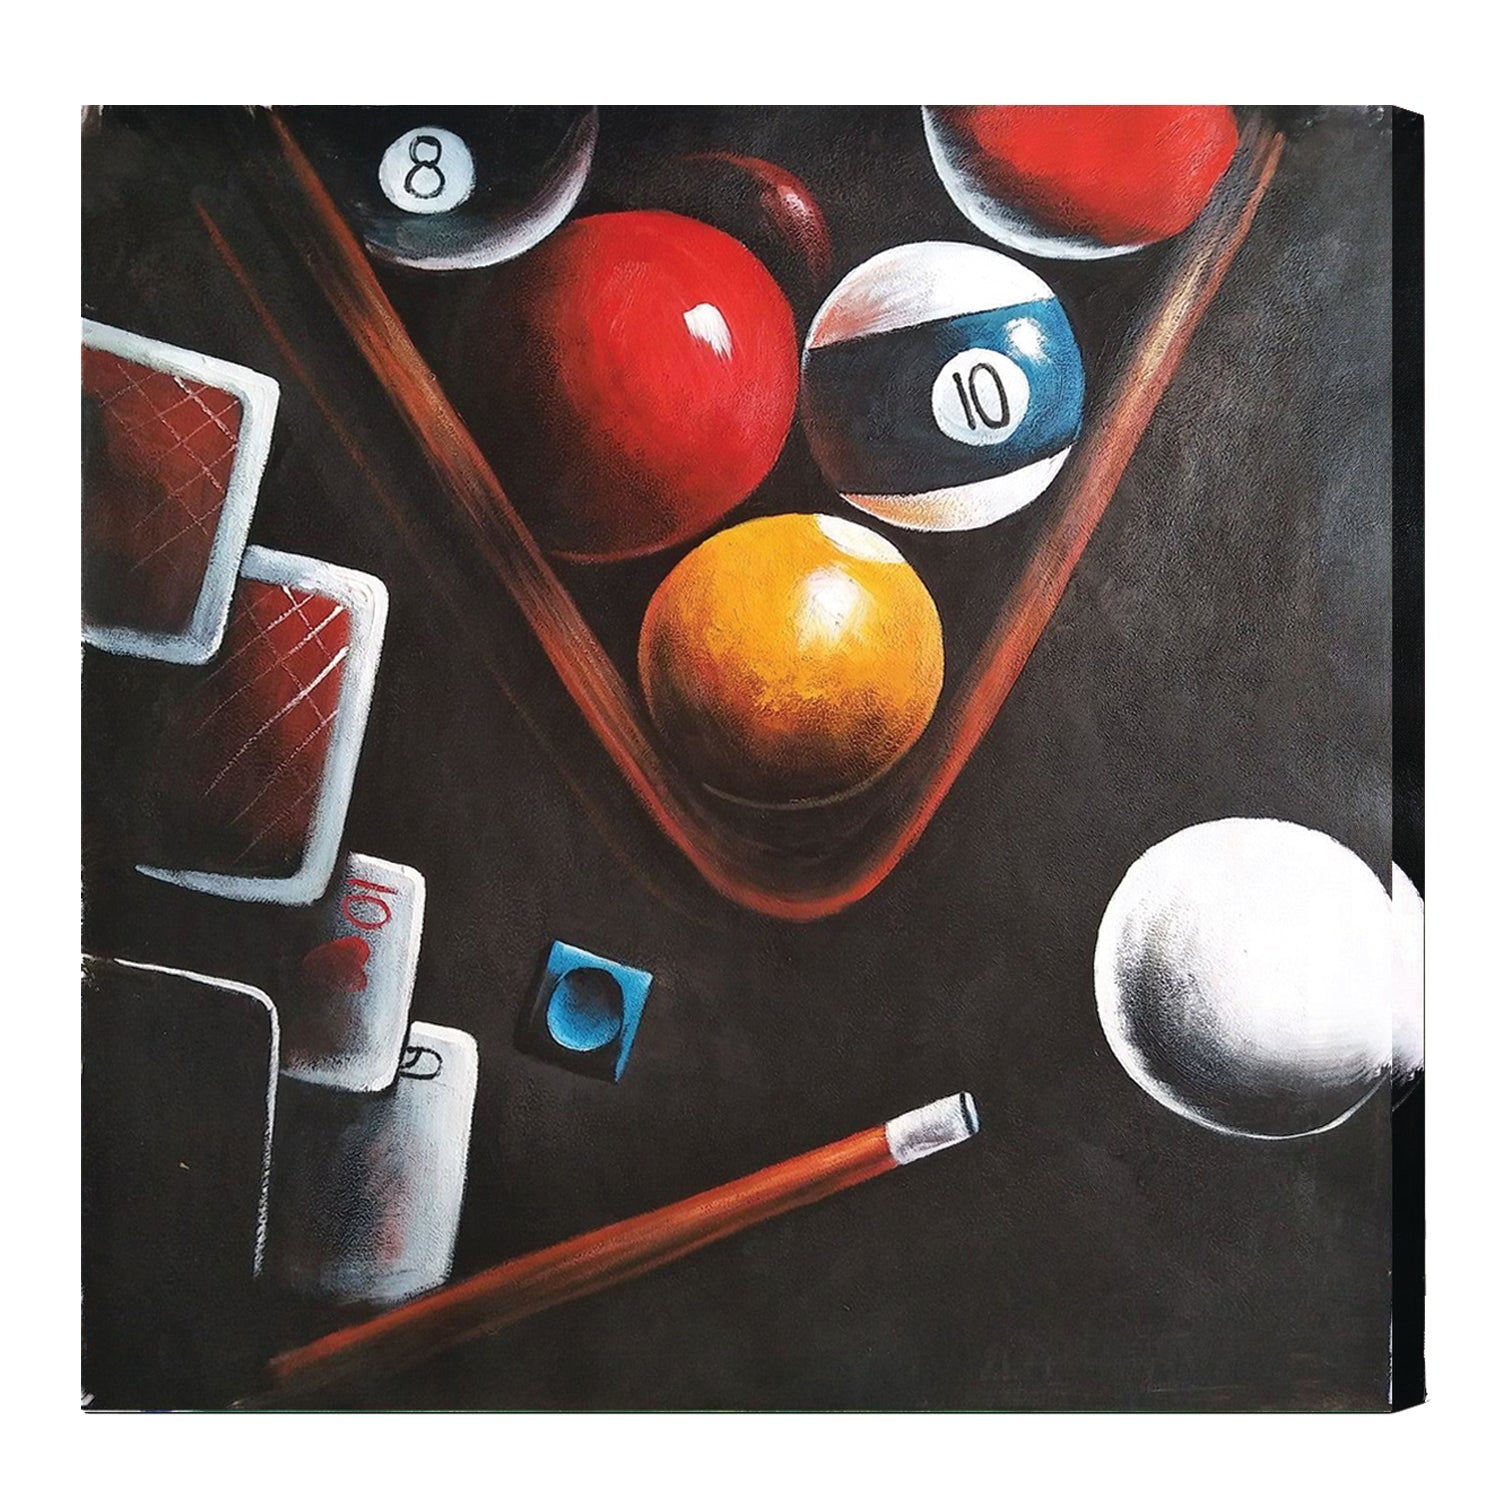 OIL PAINTING ON CANVAS - BALLS IN RACK/CUE-Game Table Genie